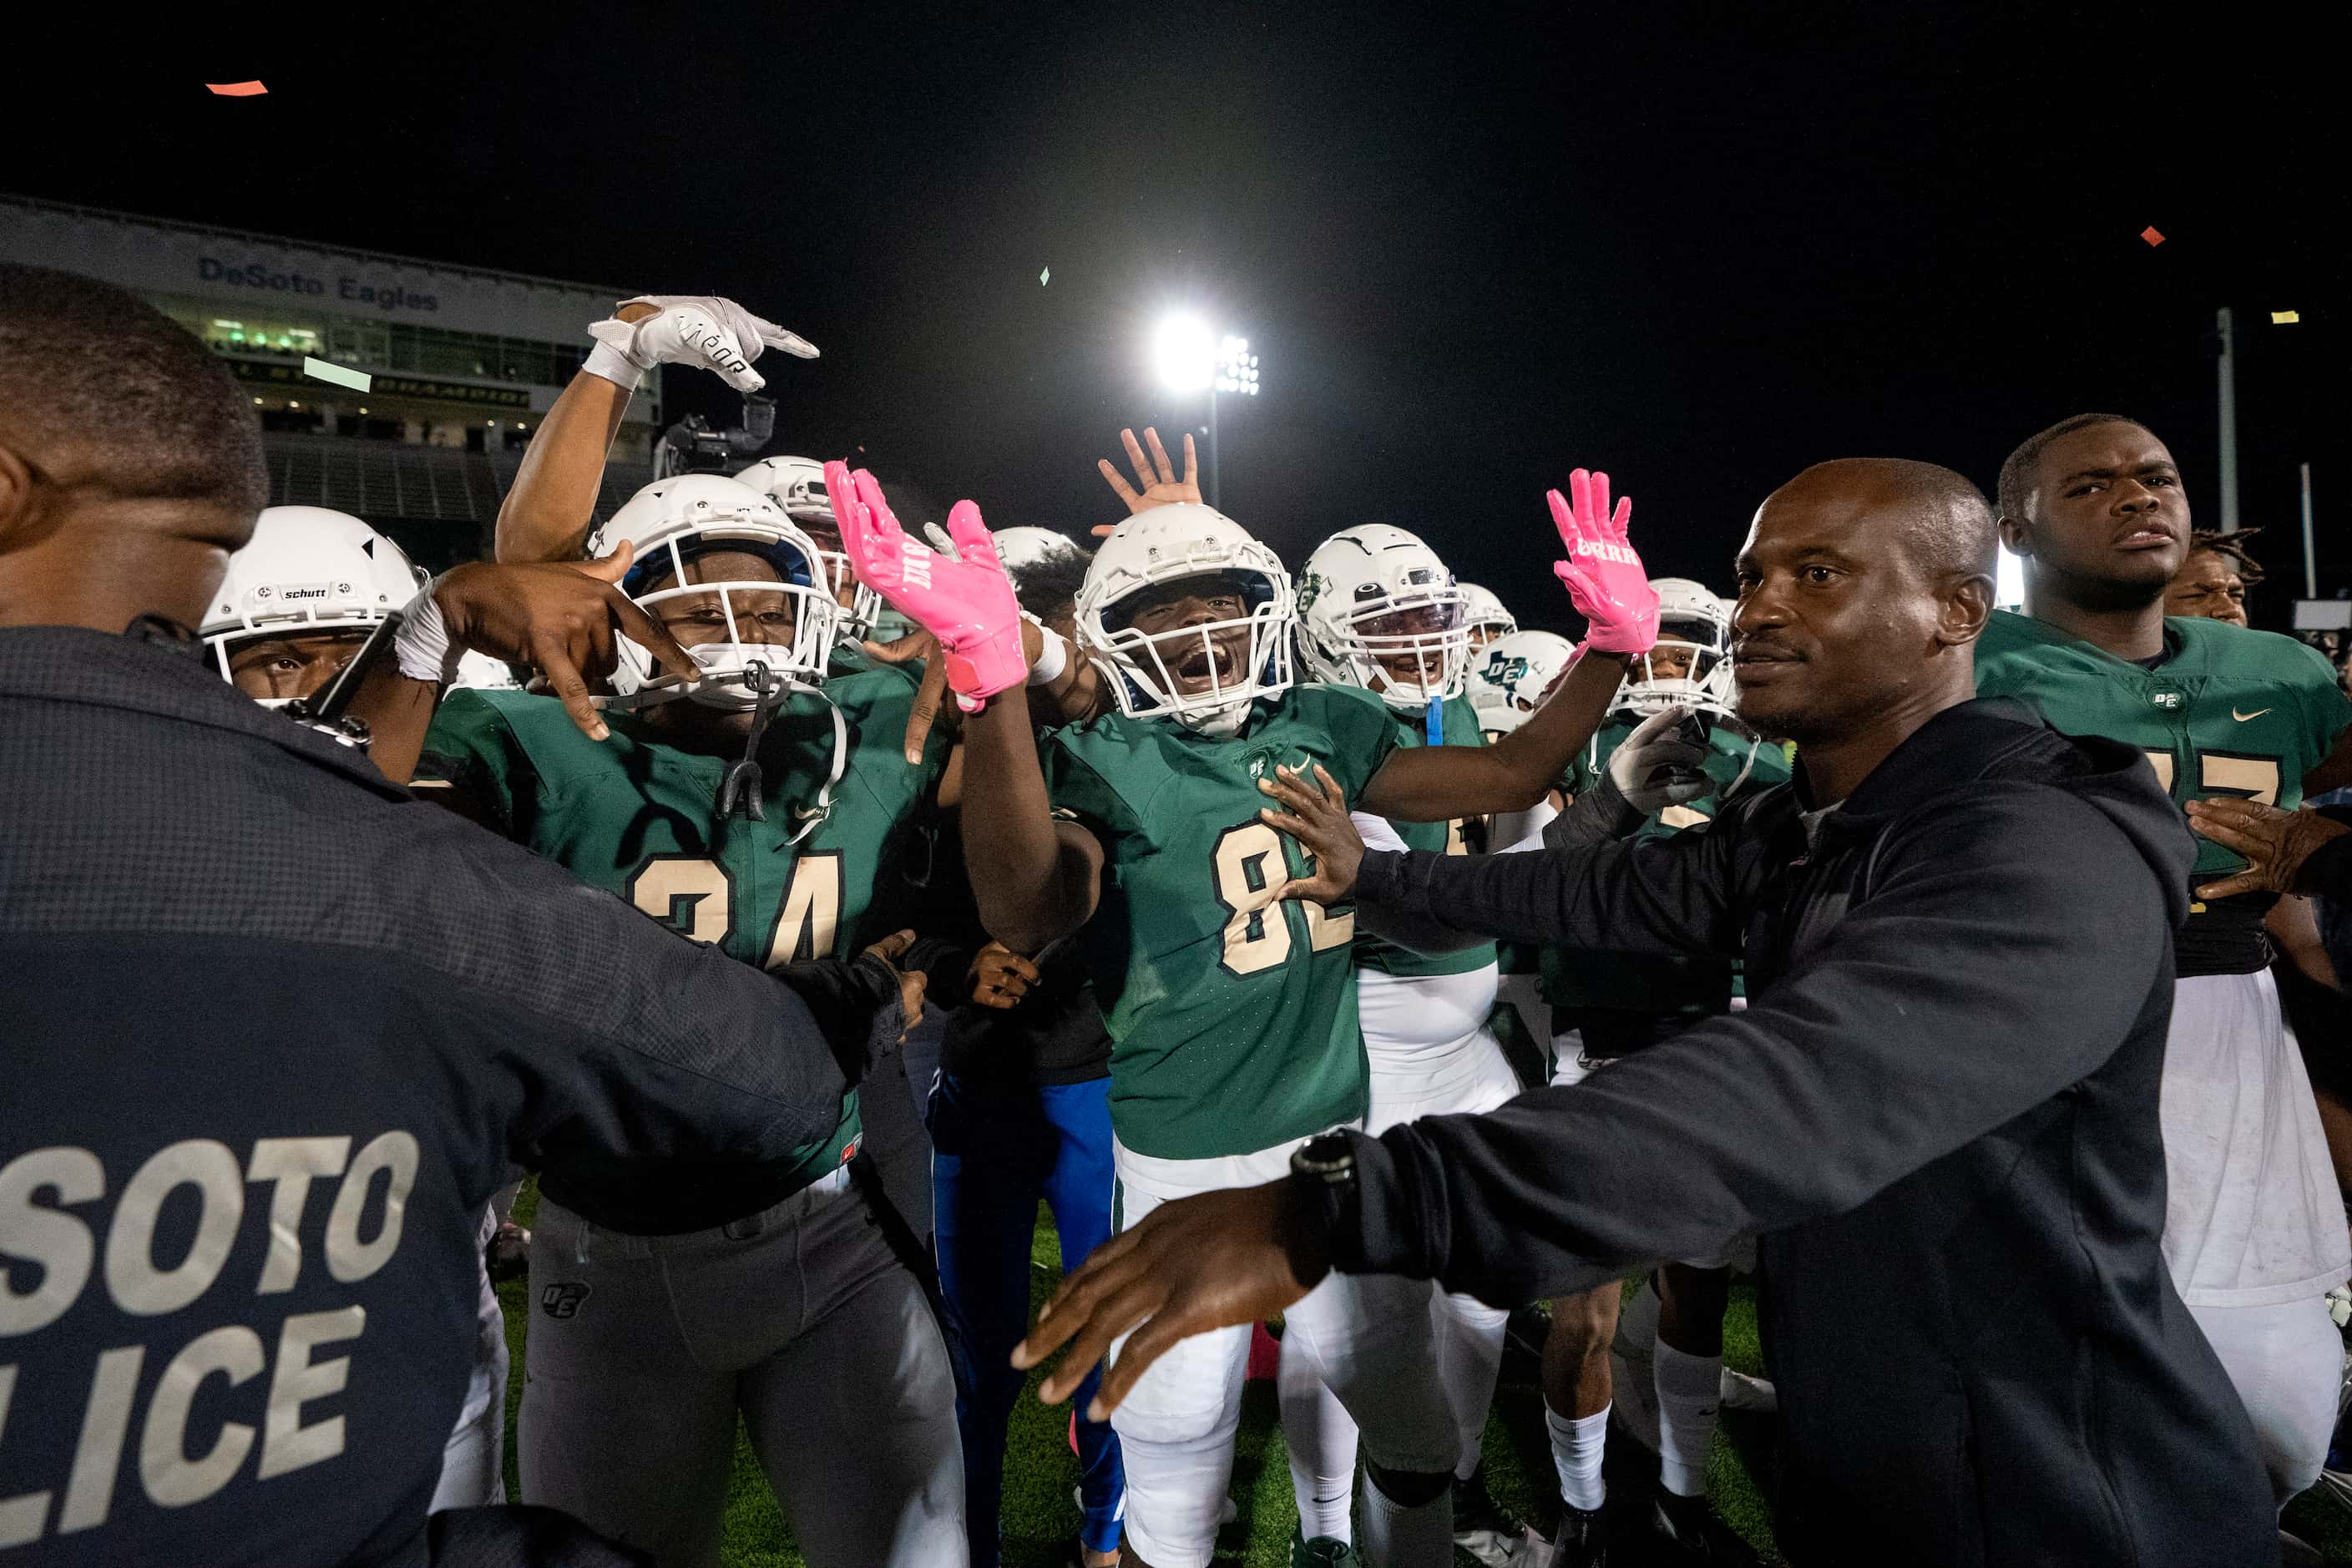 DeSoto coaches and police stand guard as DeSoto players wave goodbye to Cedar Hill players...